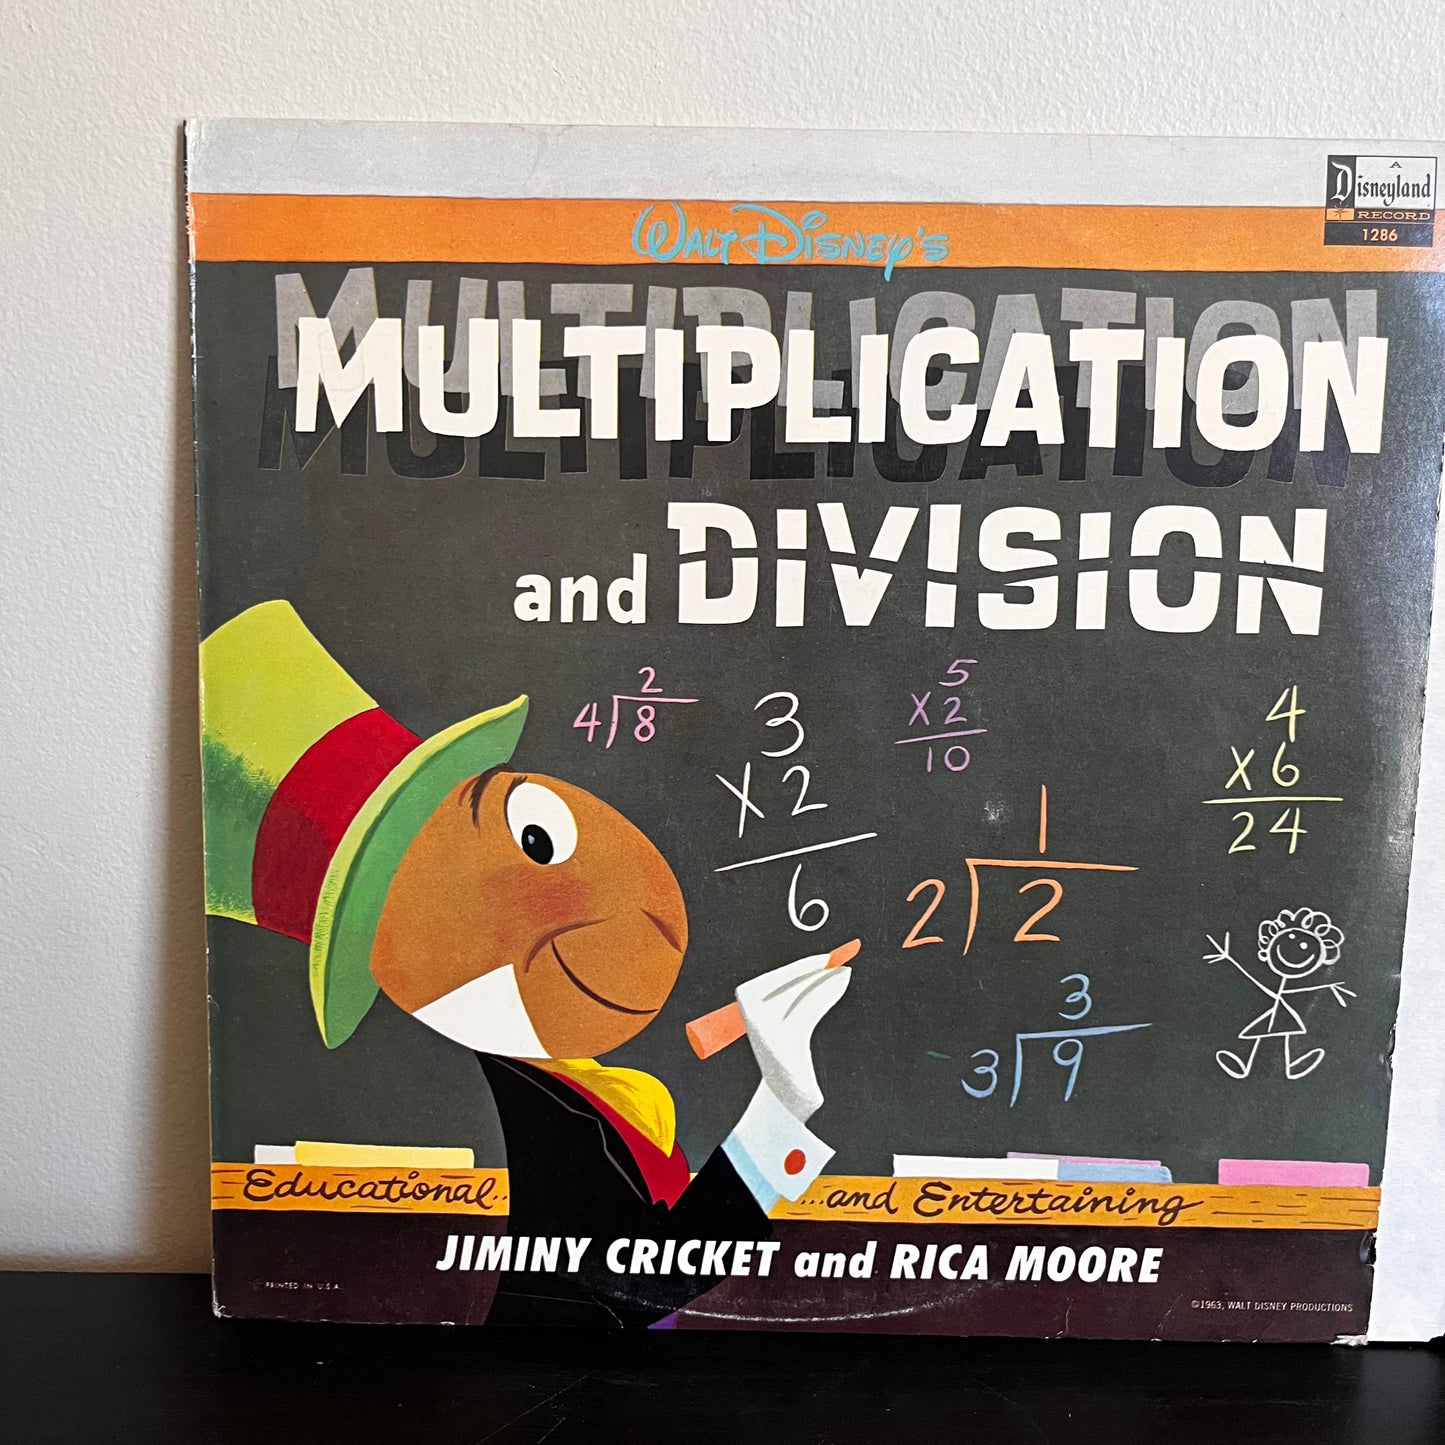 Multiplication and Division - Jimmy Cricket and Rica Moore Used Vinyl 1963 Disneyland Record 1286 VG+